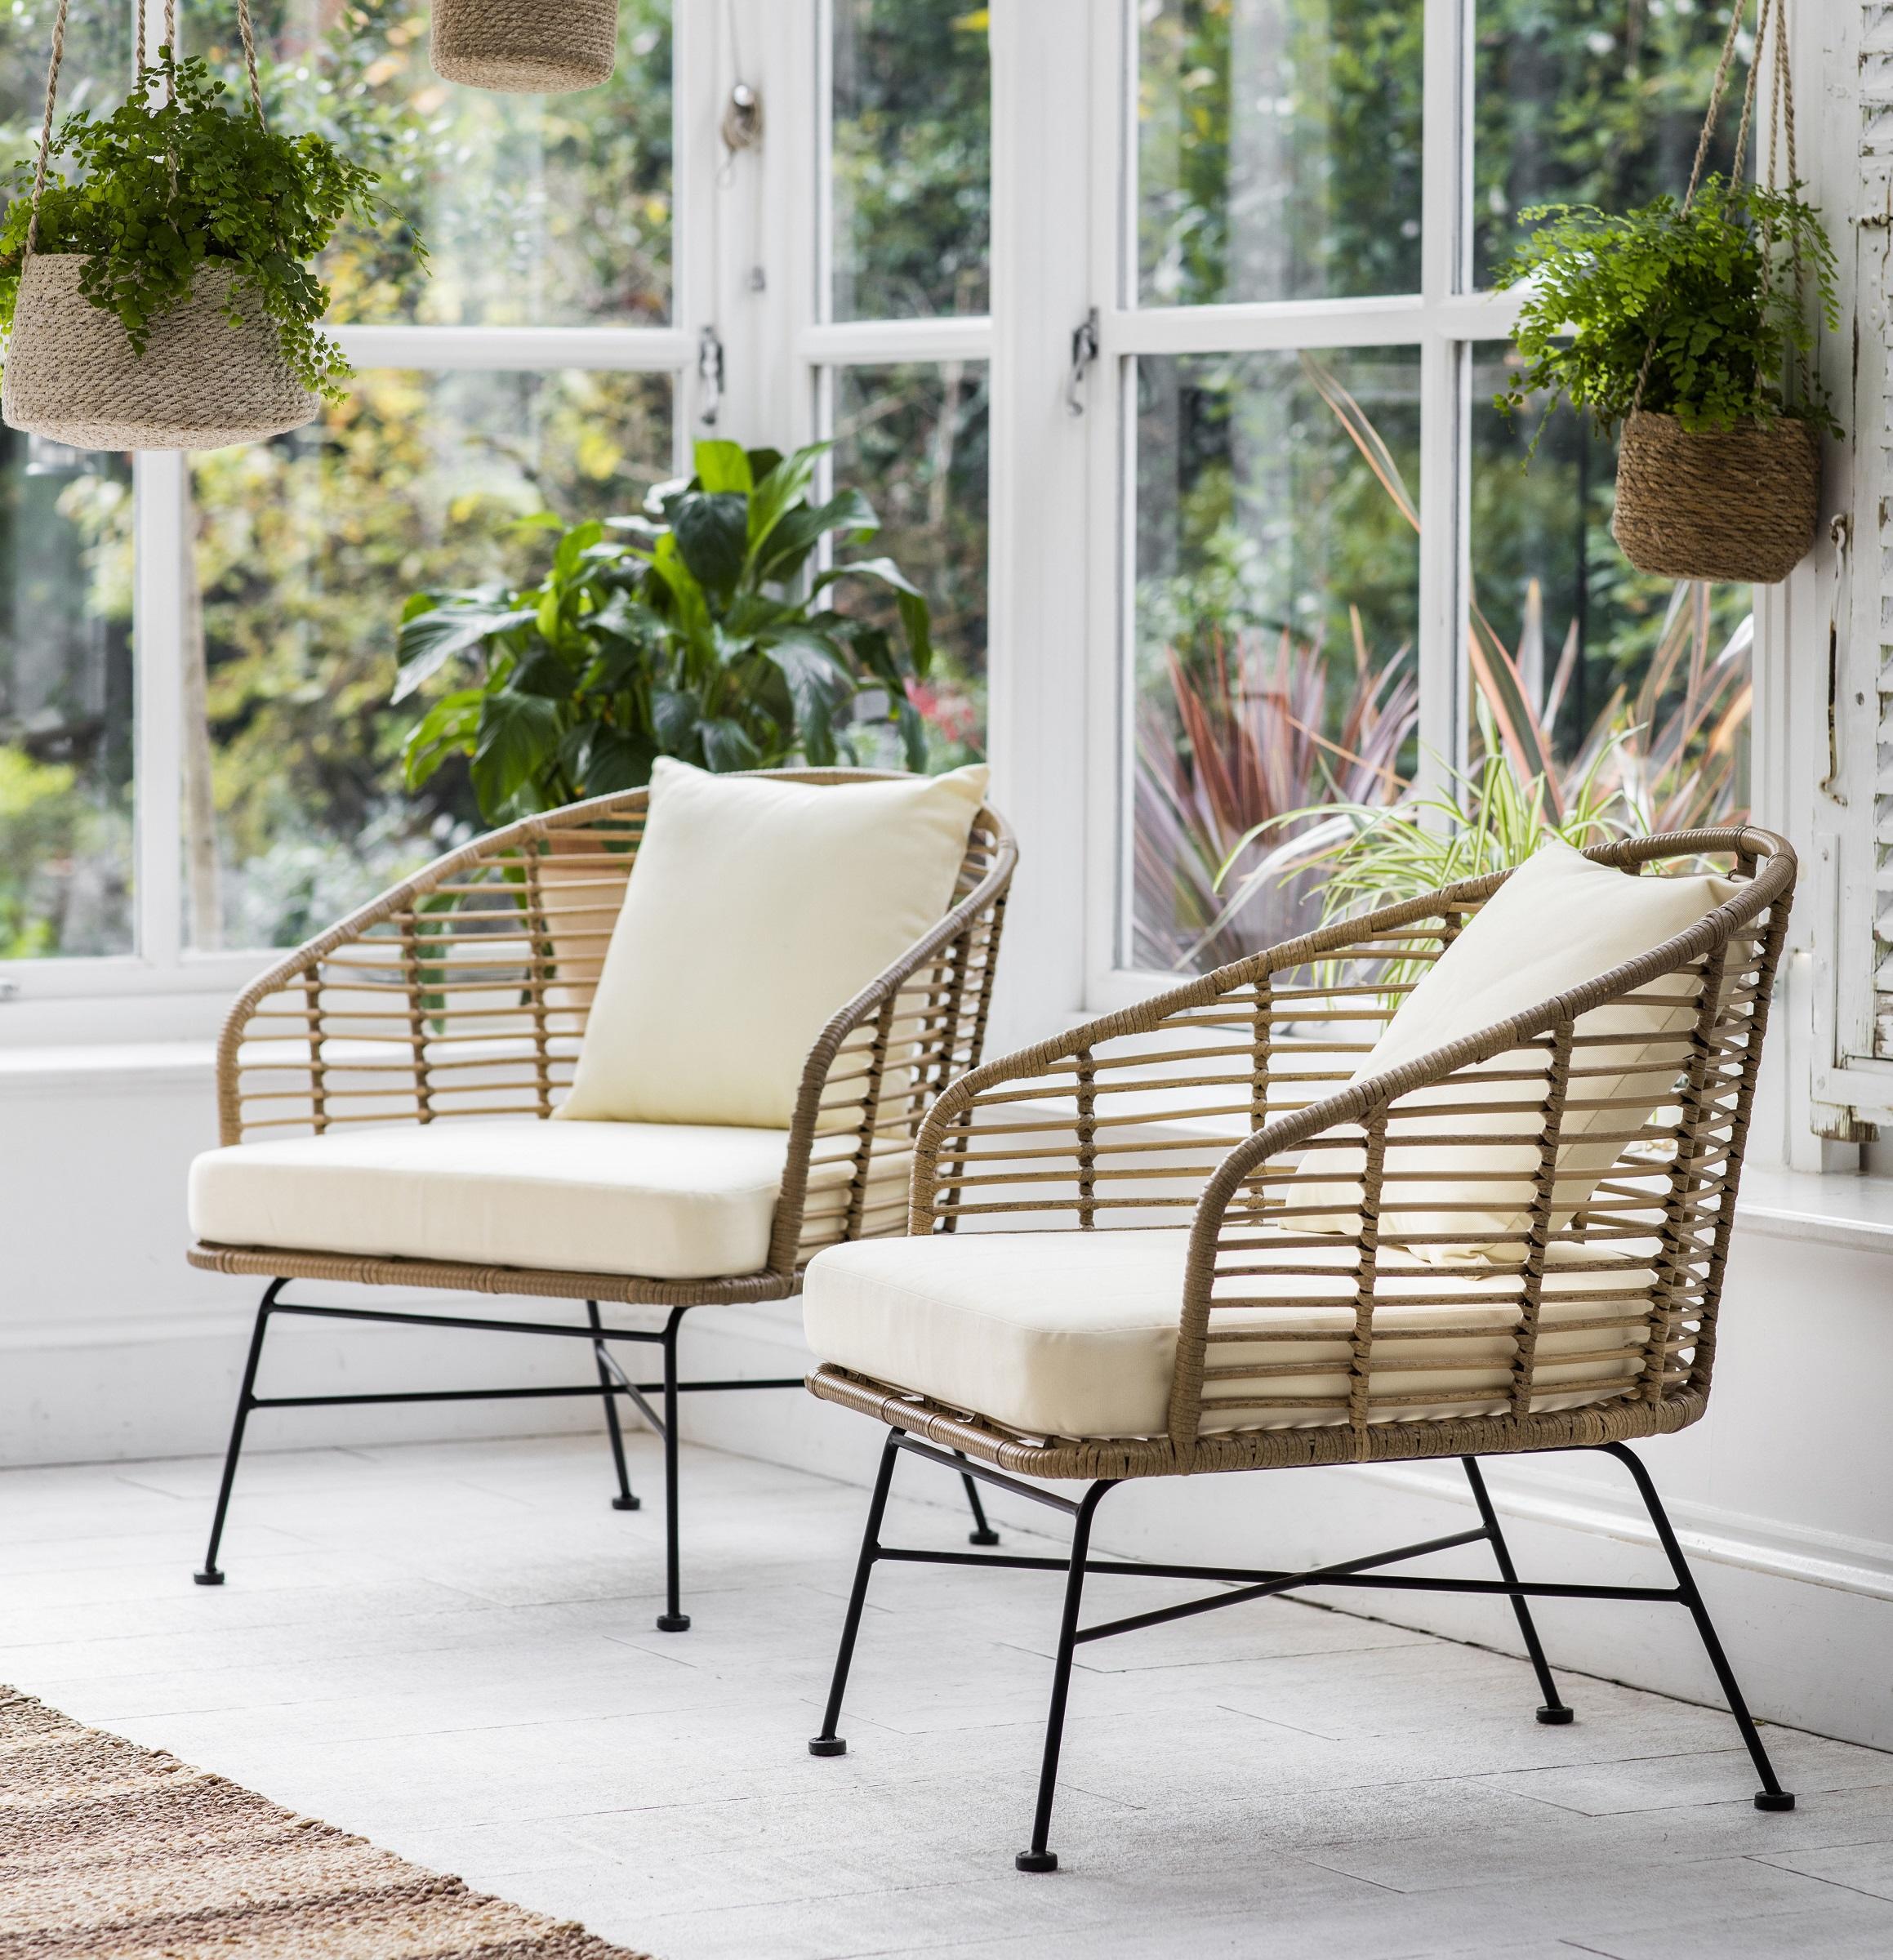 outdoor garden lounge armchairs in all weather rattan bamboo weave for indoor conservatory and garden rooms as well as gardens, patios and terraces